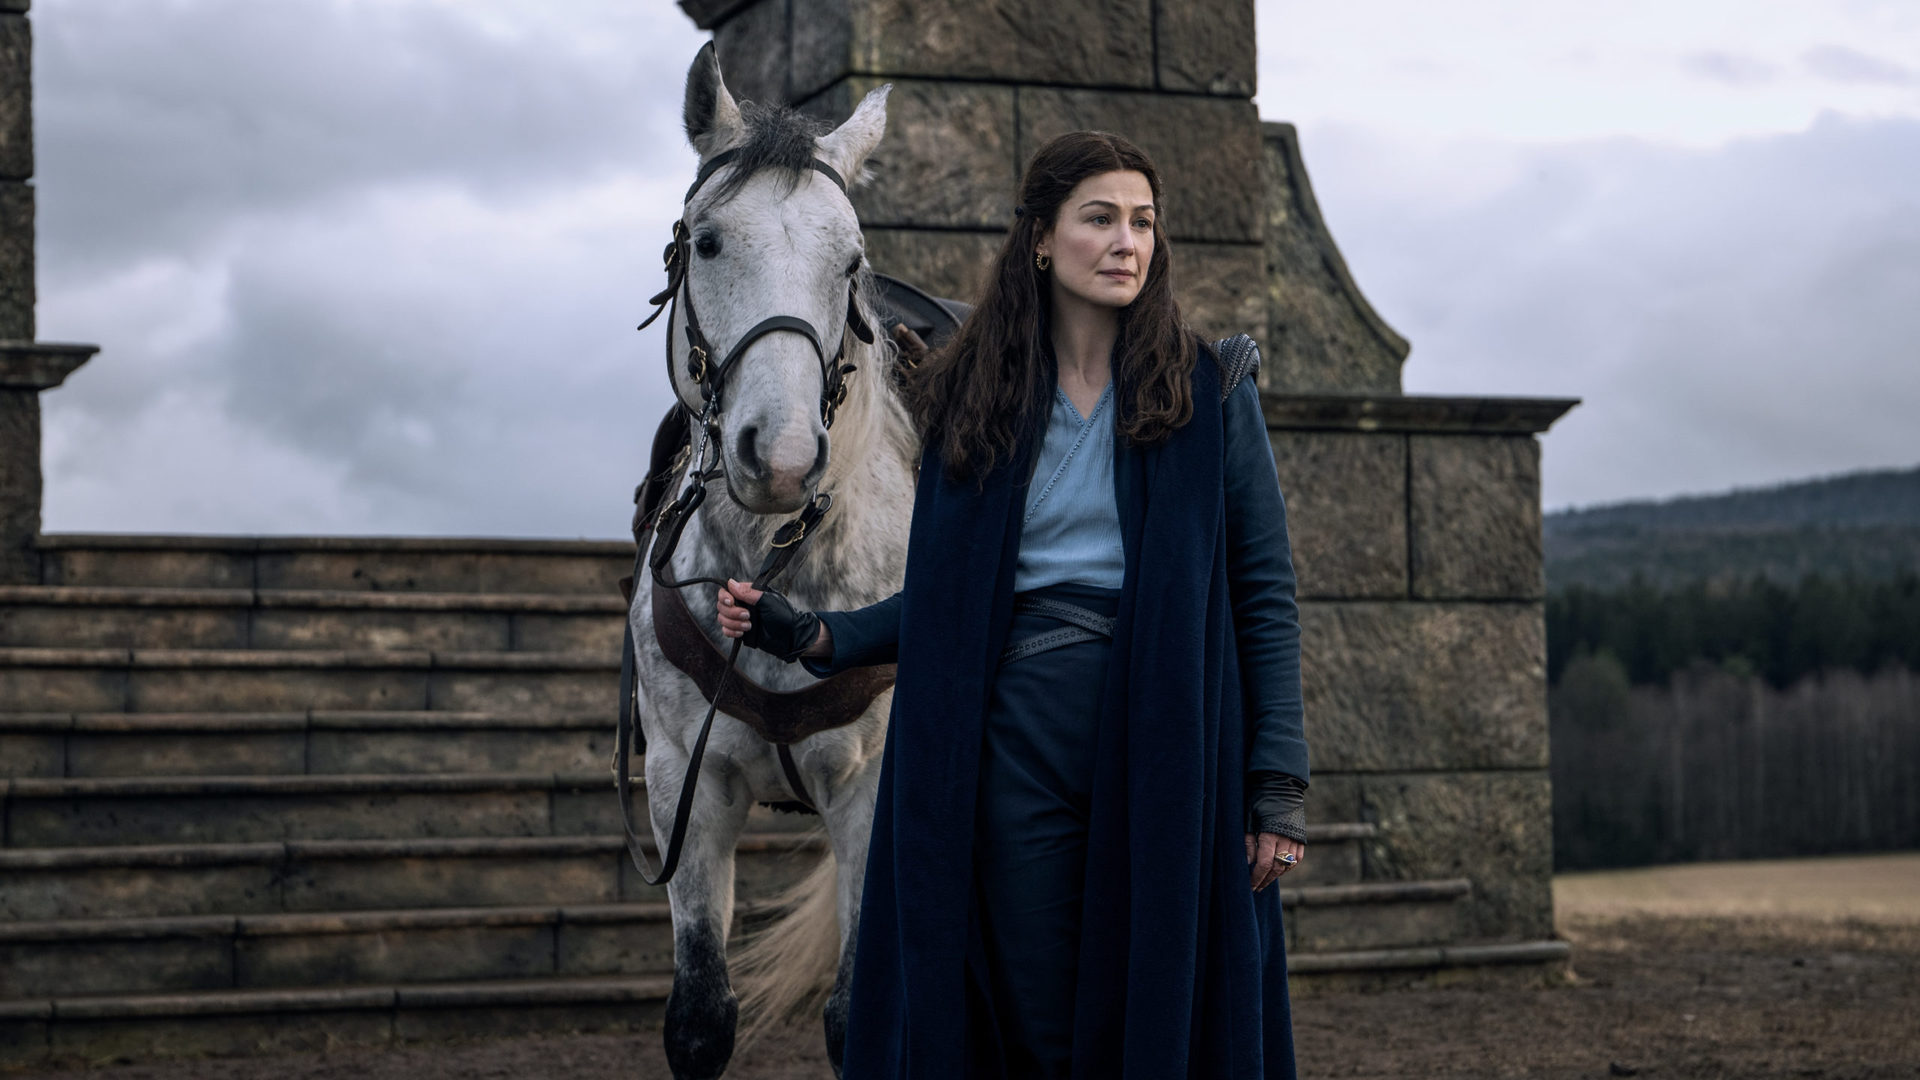 Rosamund Pike with a horse in The Wheel of Time